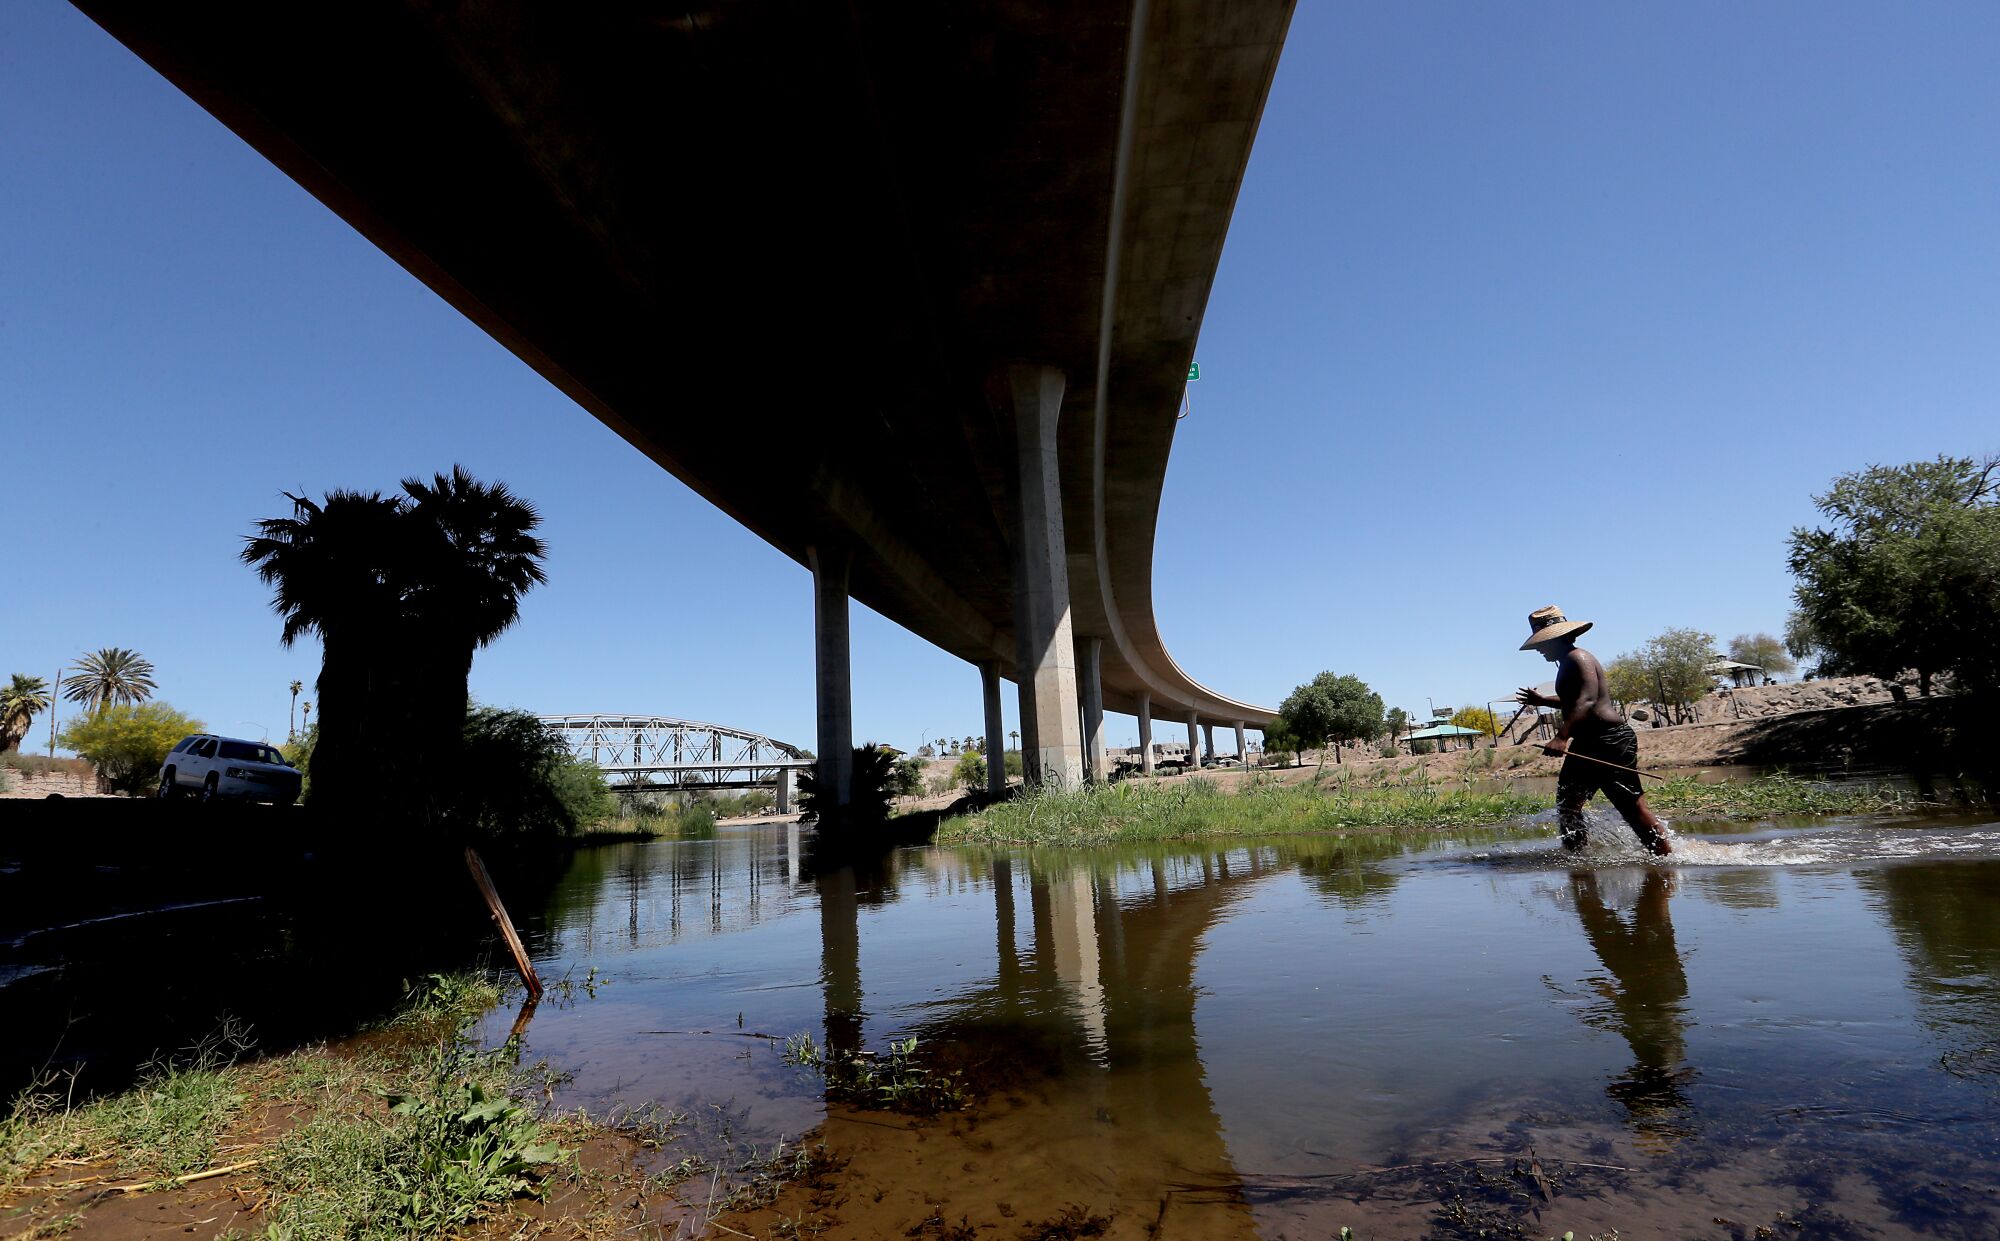 A youth wades in the Colorado River under Interstate 8 in Yuma.